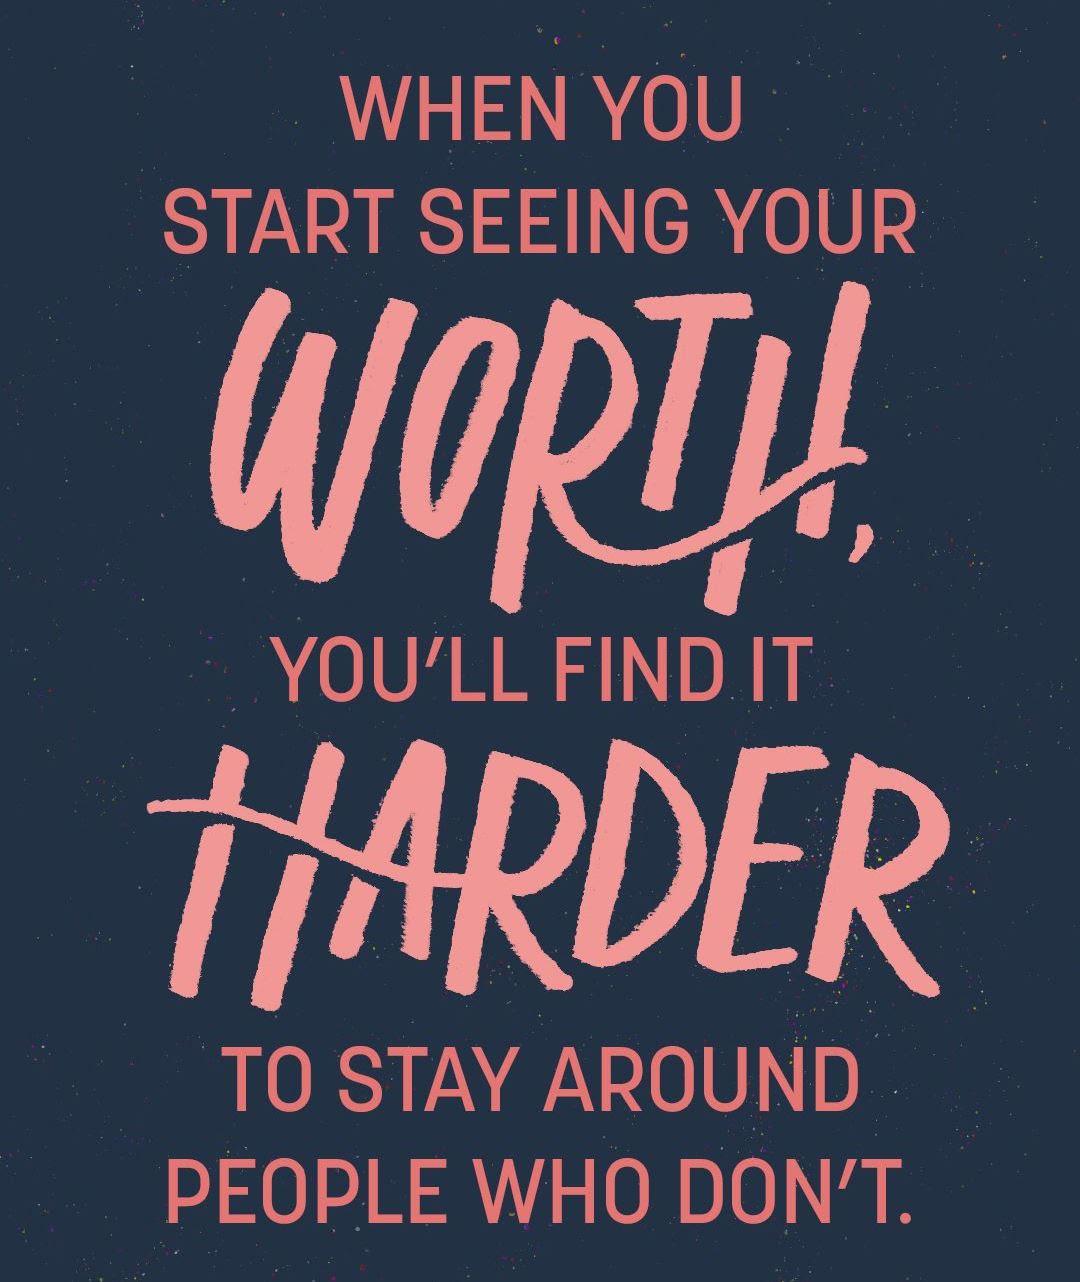 when you start seeing your worth, you'll find it harder to stay around people who don't.